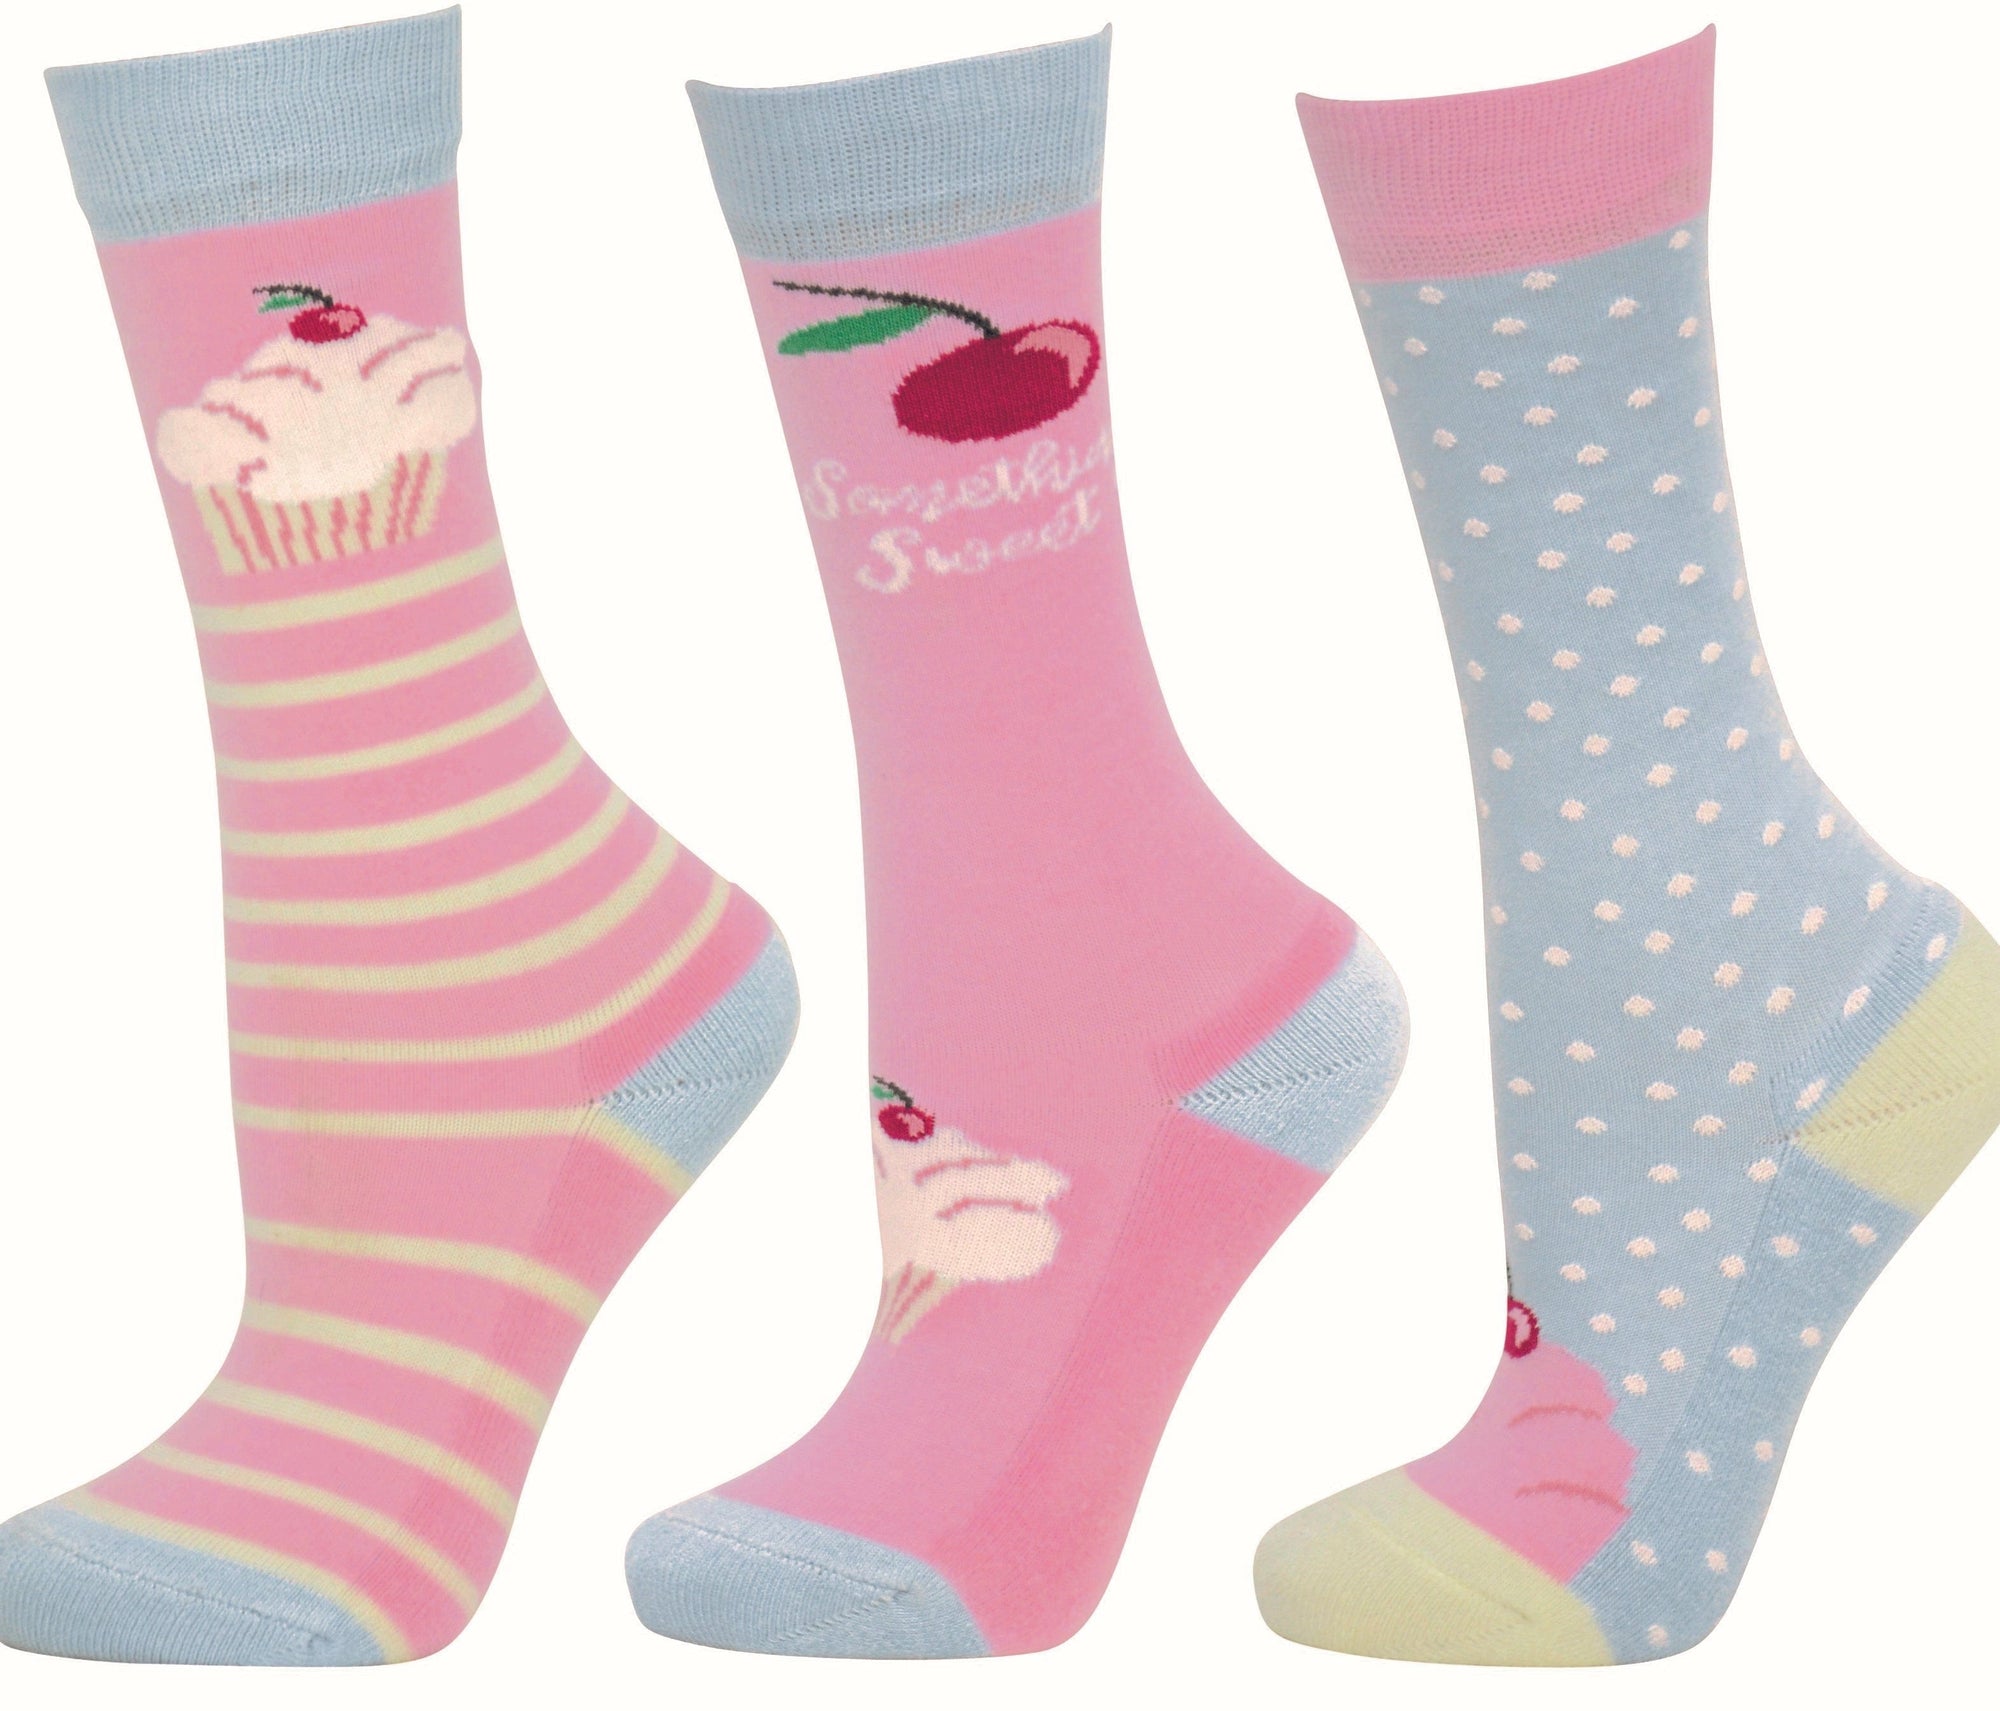 Hyfashion Cupcake Socks (Pack Of 3) Blue Tint/Pink Icing